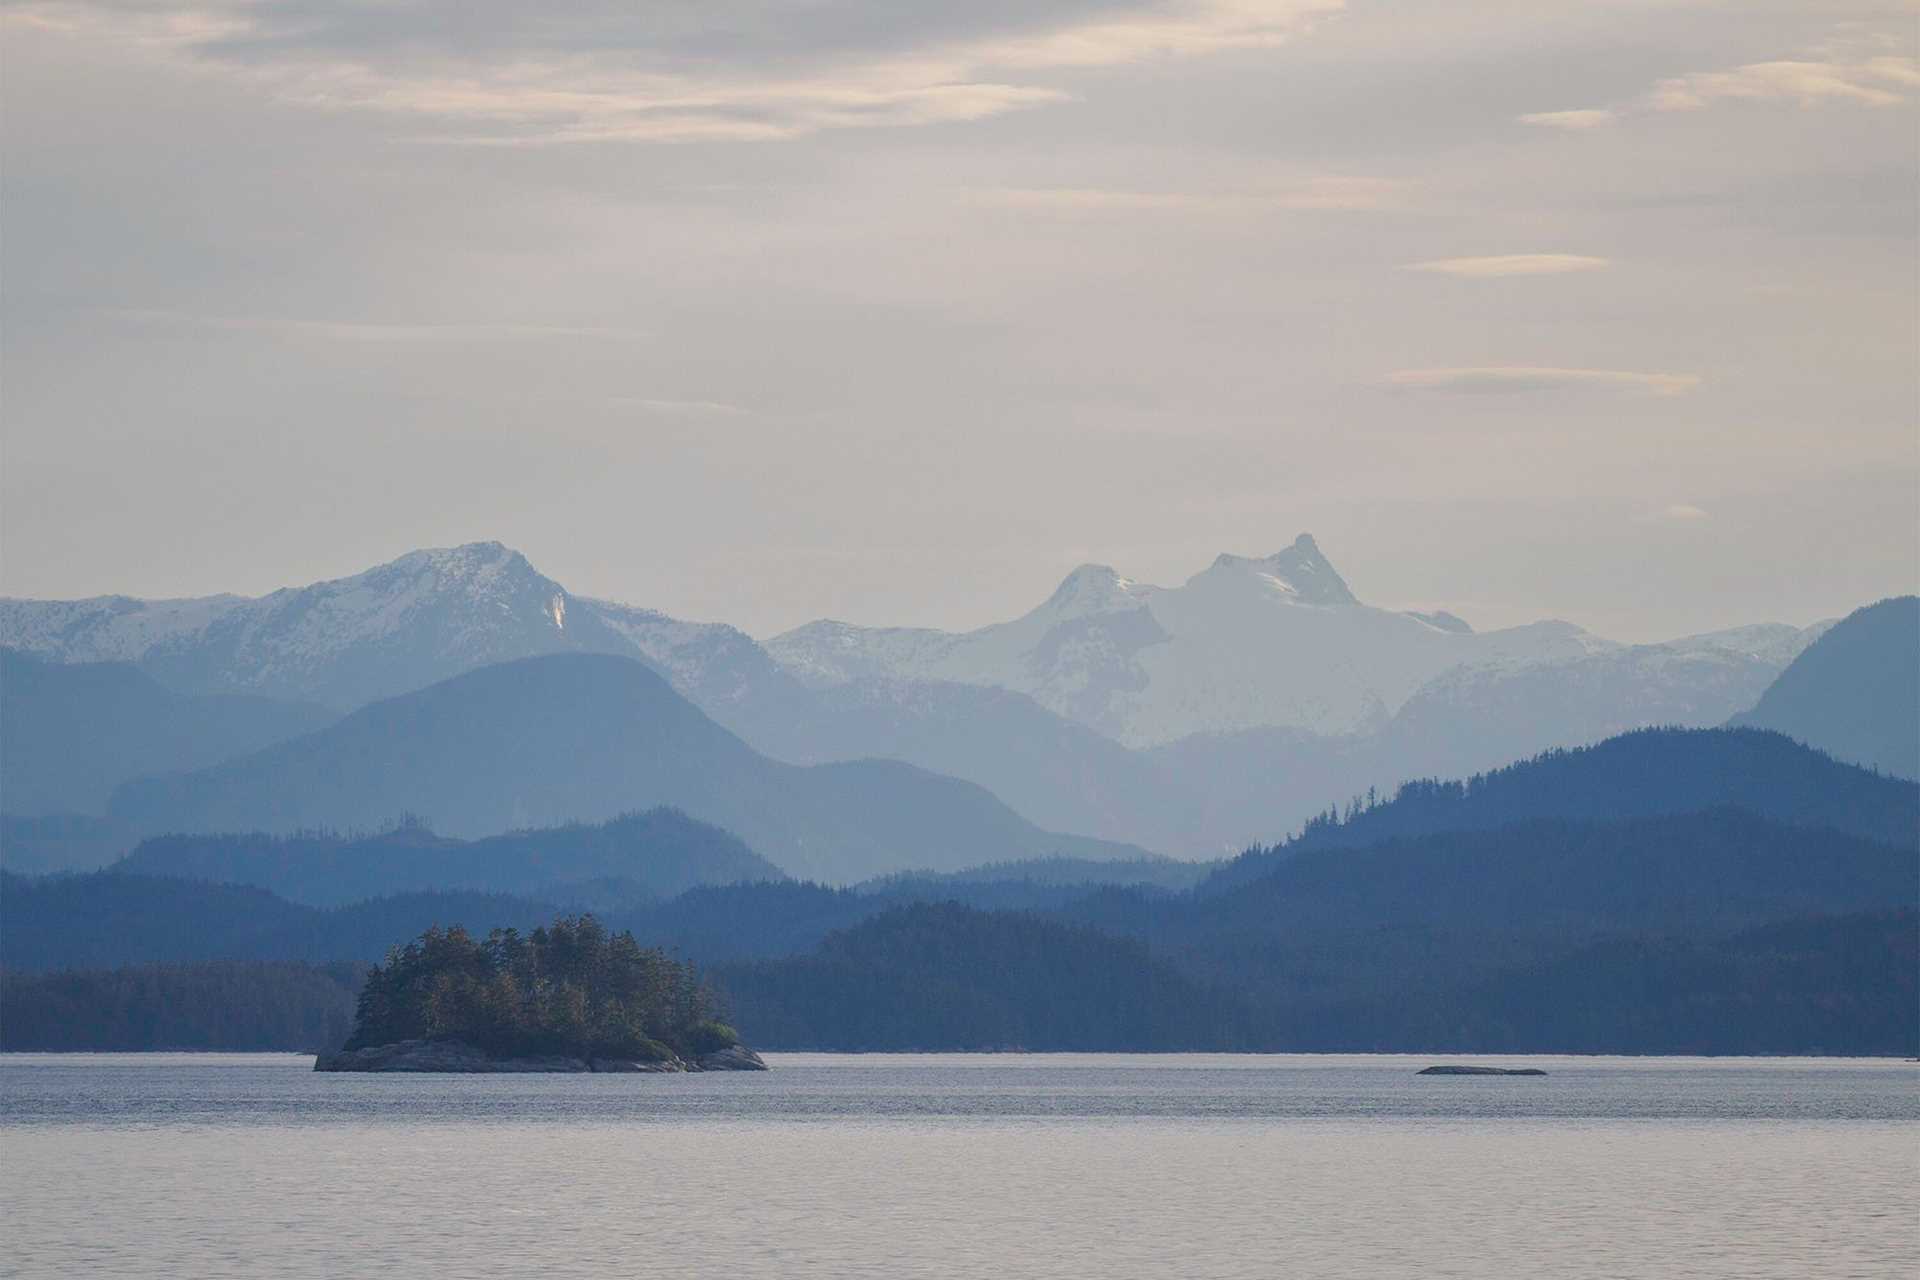 mountains shrouded in mist, with an island in the foreground